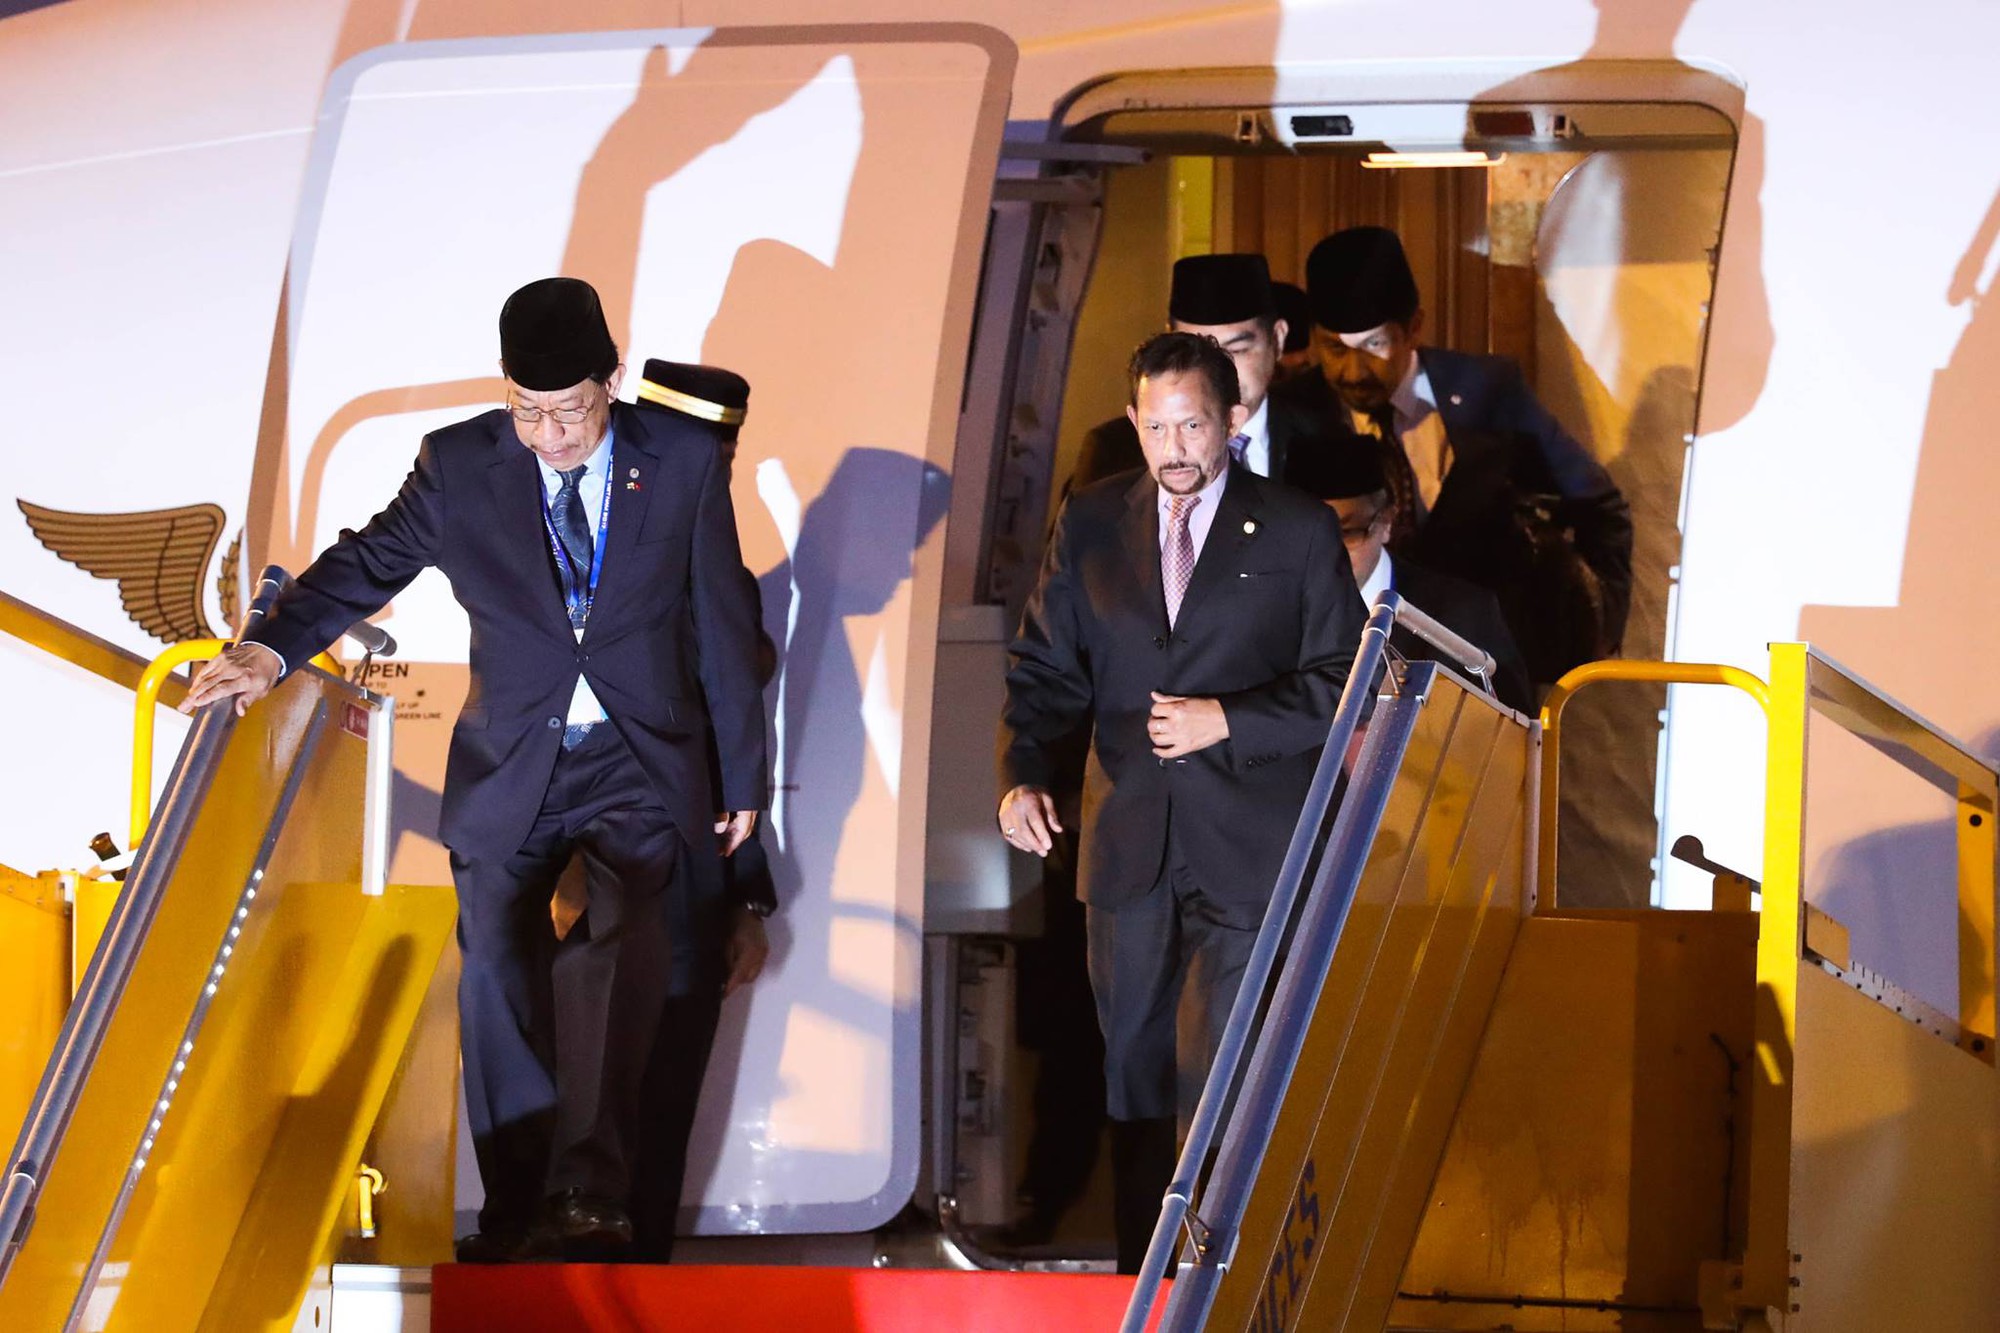 Hassanal Bolkiah (R), the Sultan of Brunei, leaves the aircraft after landing at Da Nang International Airport. Photo: Tuoi Tre